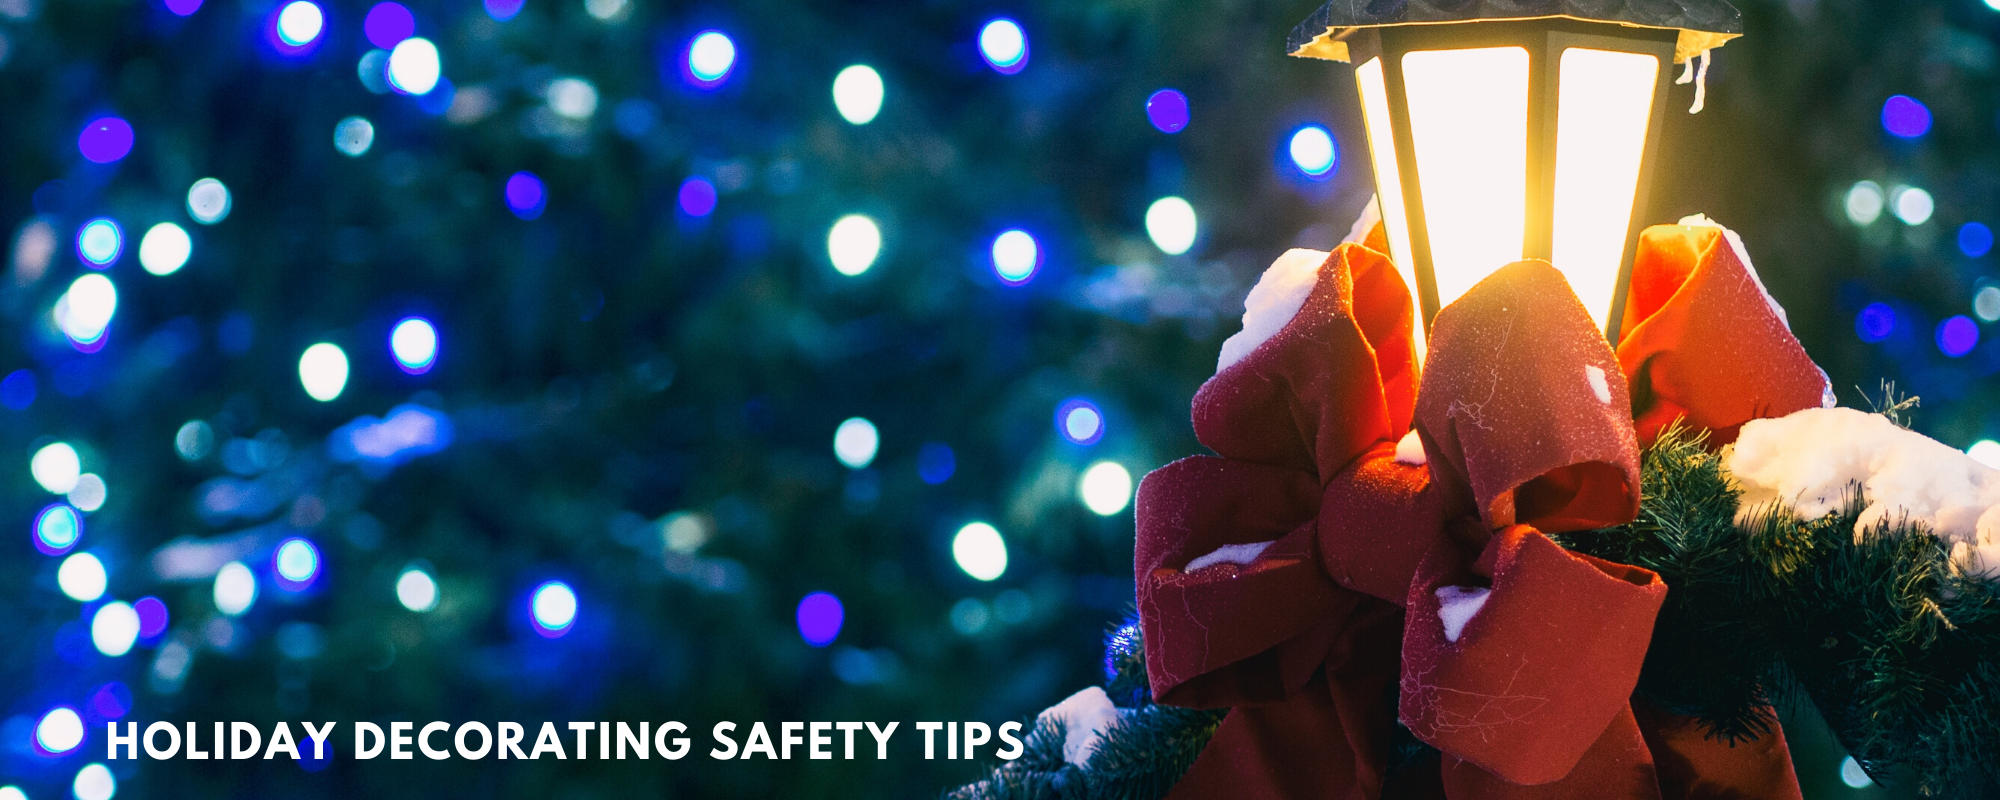 Holiday decorating safety tips on background of blue with white lights and a red ribbon on a lamp post